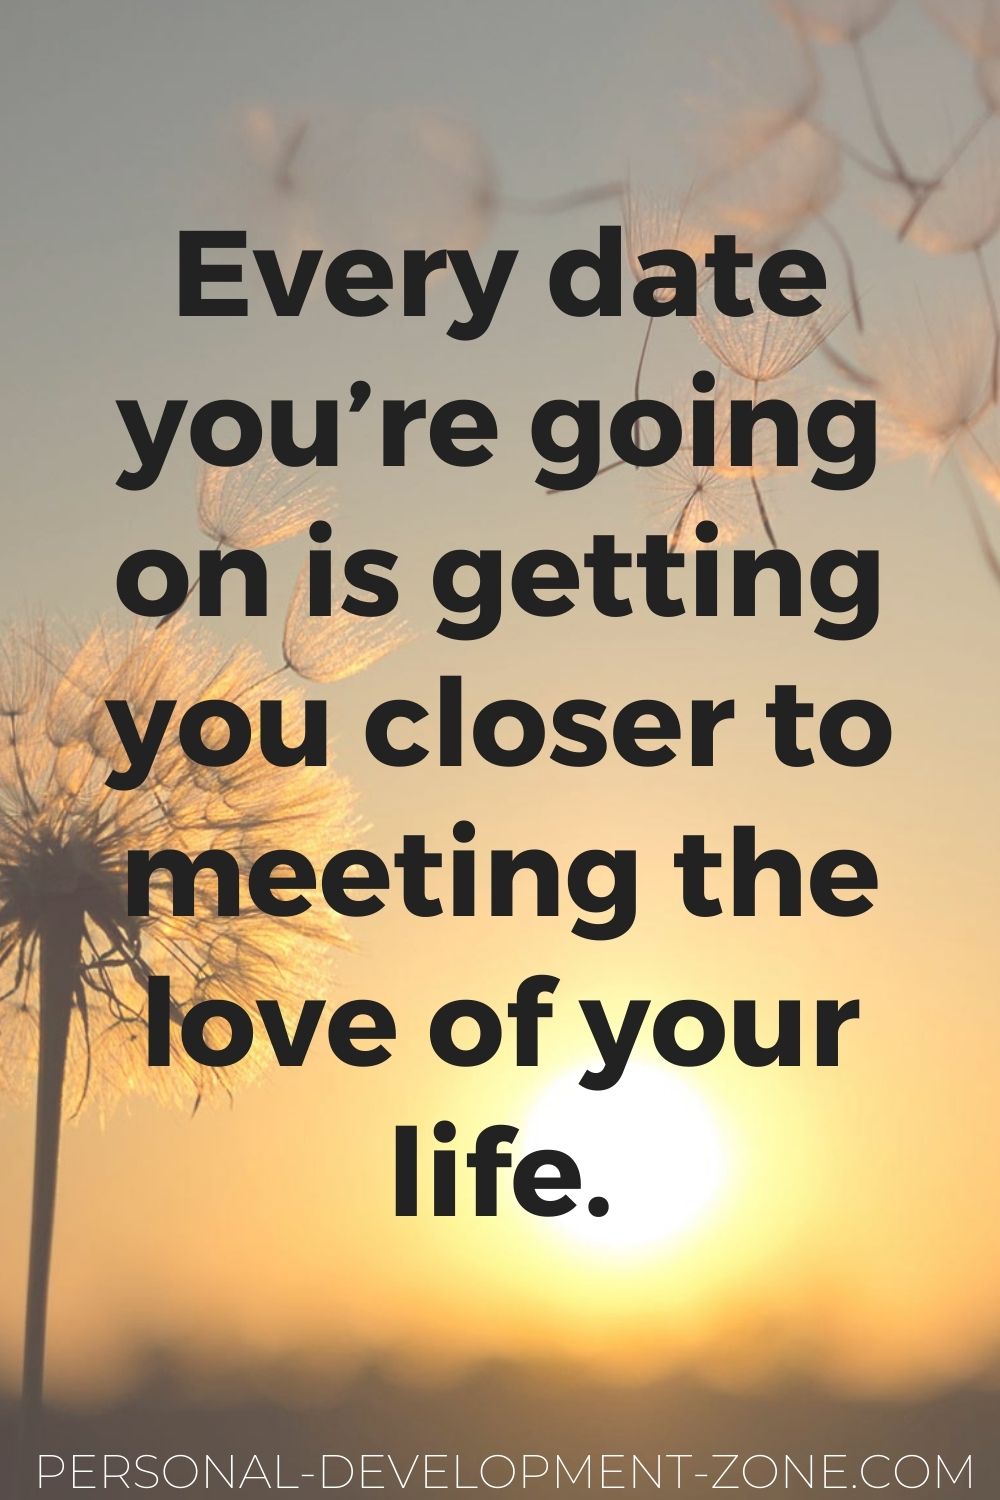 dating quotes every date you're going on is getting you closer to meeting the love of your life